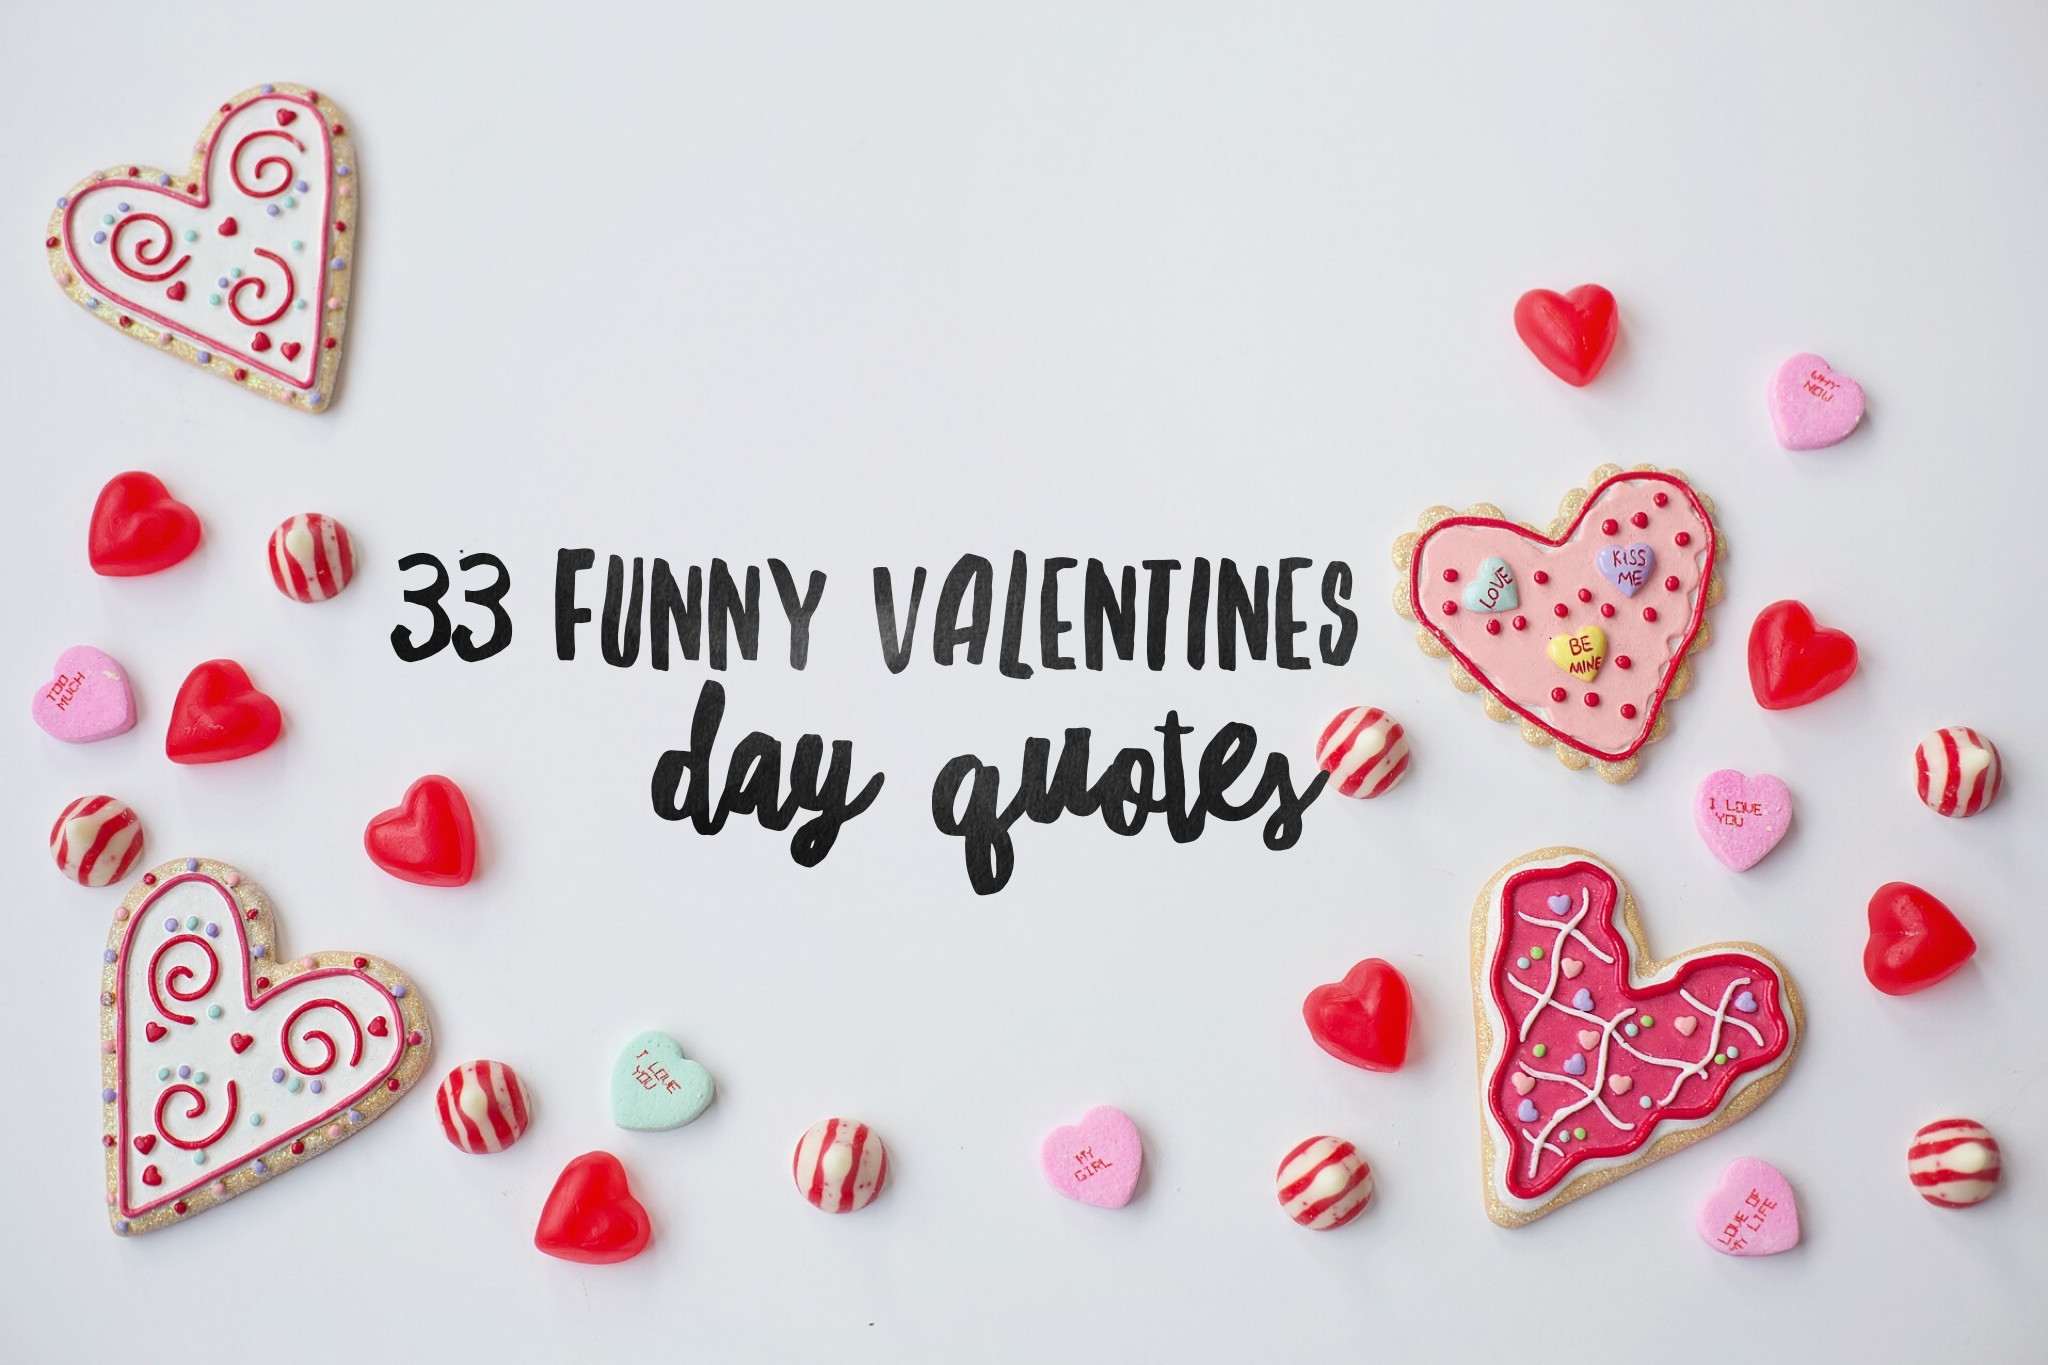 Valentines Day Quotes Funny
 33 Funny Valentines Day Quotes